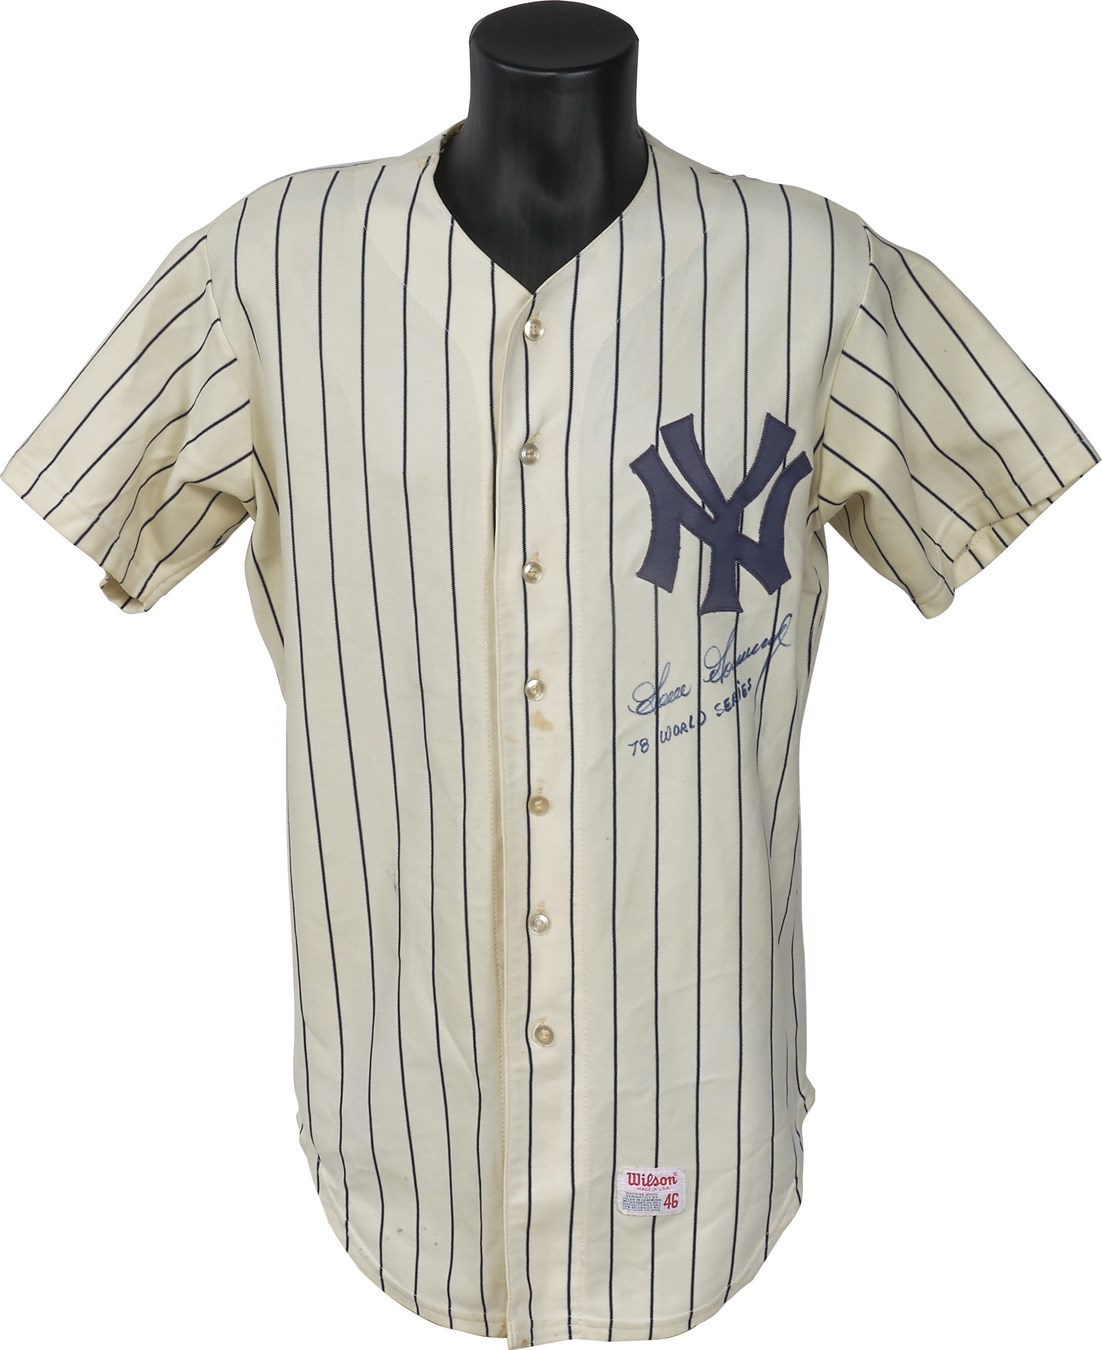 NY Yankees, Giants & Mets - 1978 Rich "Goose" Gossage World Champion New York Yankees Game Worn Jersey - Photomatched to Iconic Photo with Munson